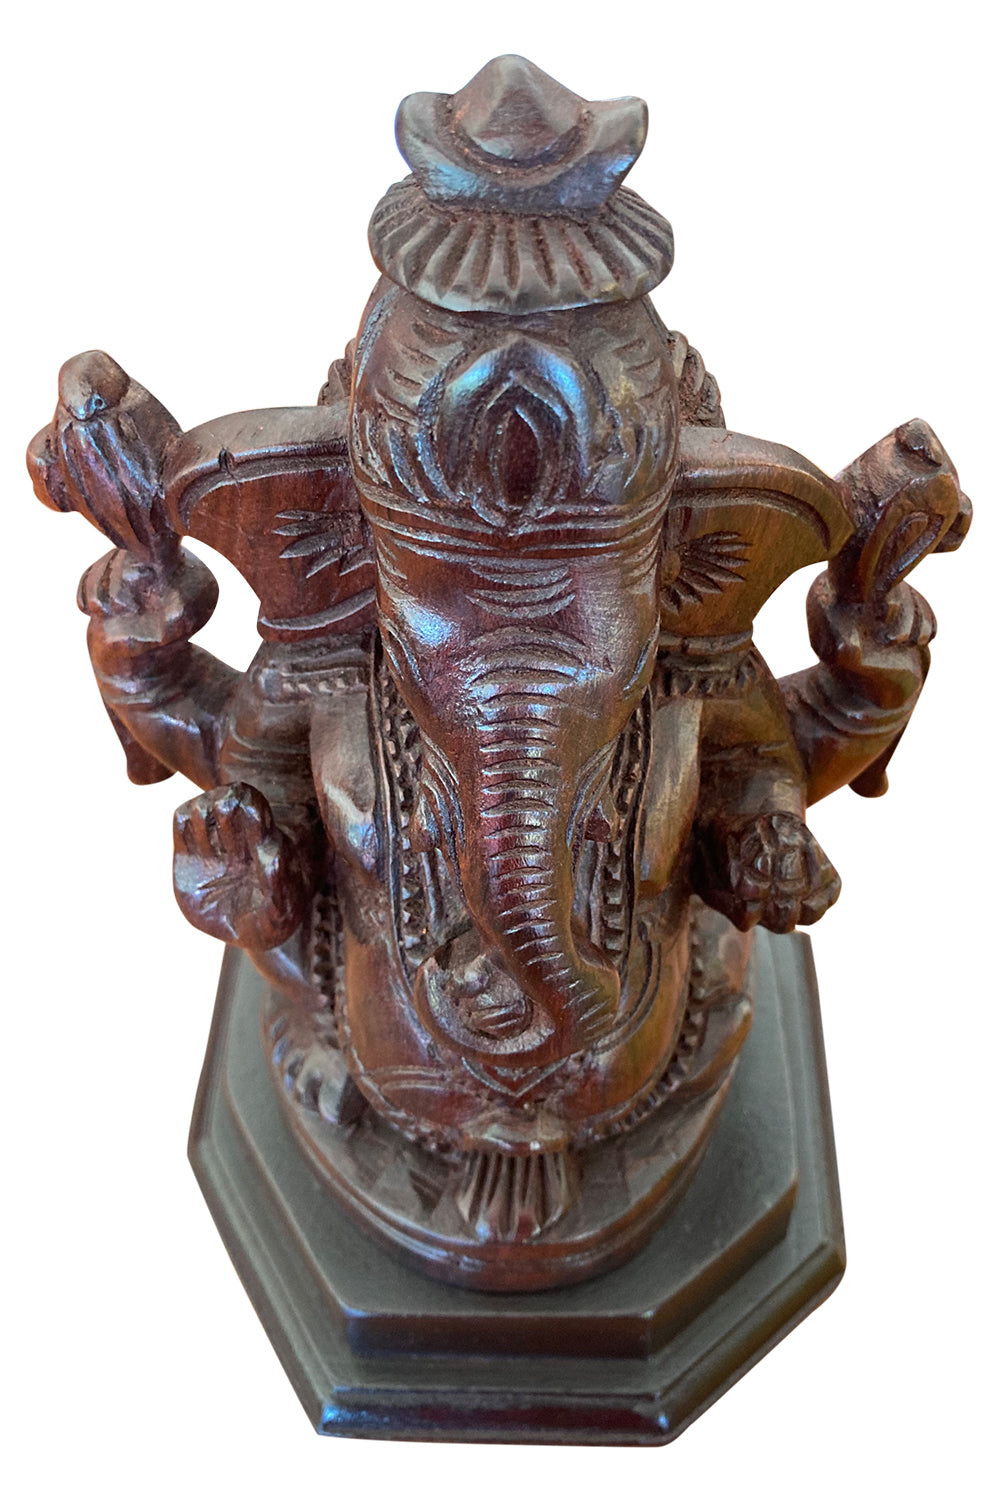 Southloom Handmade Ganesha Handicraft 10 inches (Carved from Rose Wood)